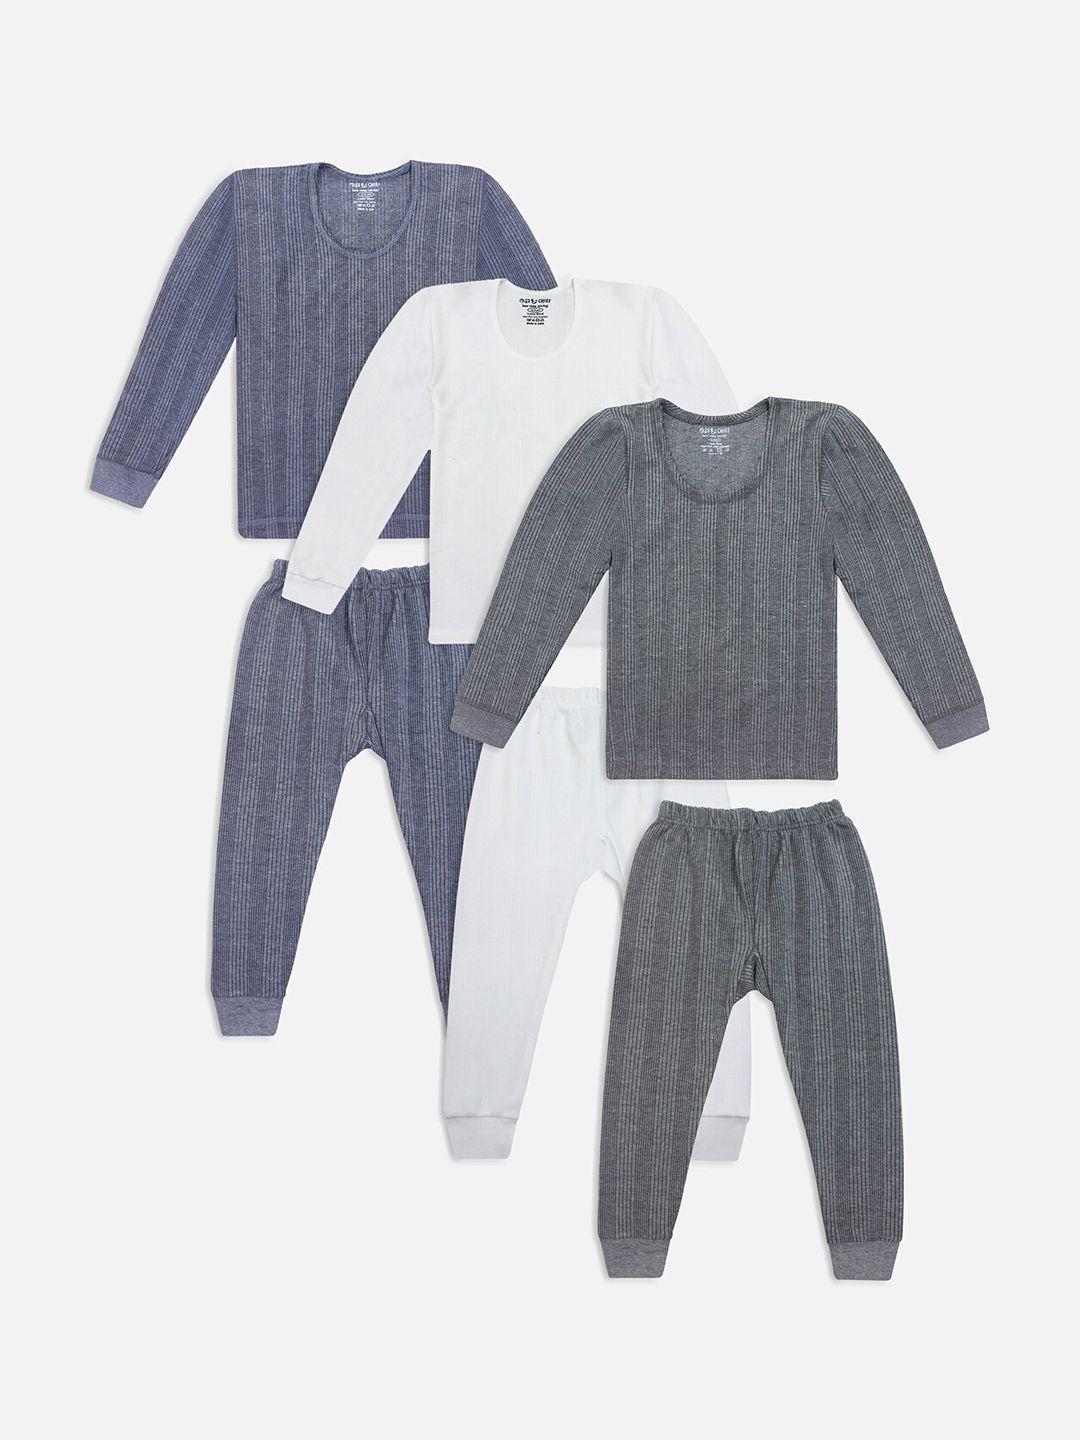 miss & chief kids pack of 3 striped cotton thermal set